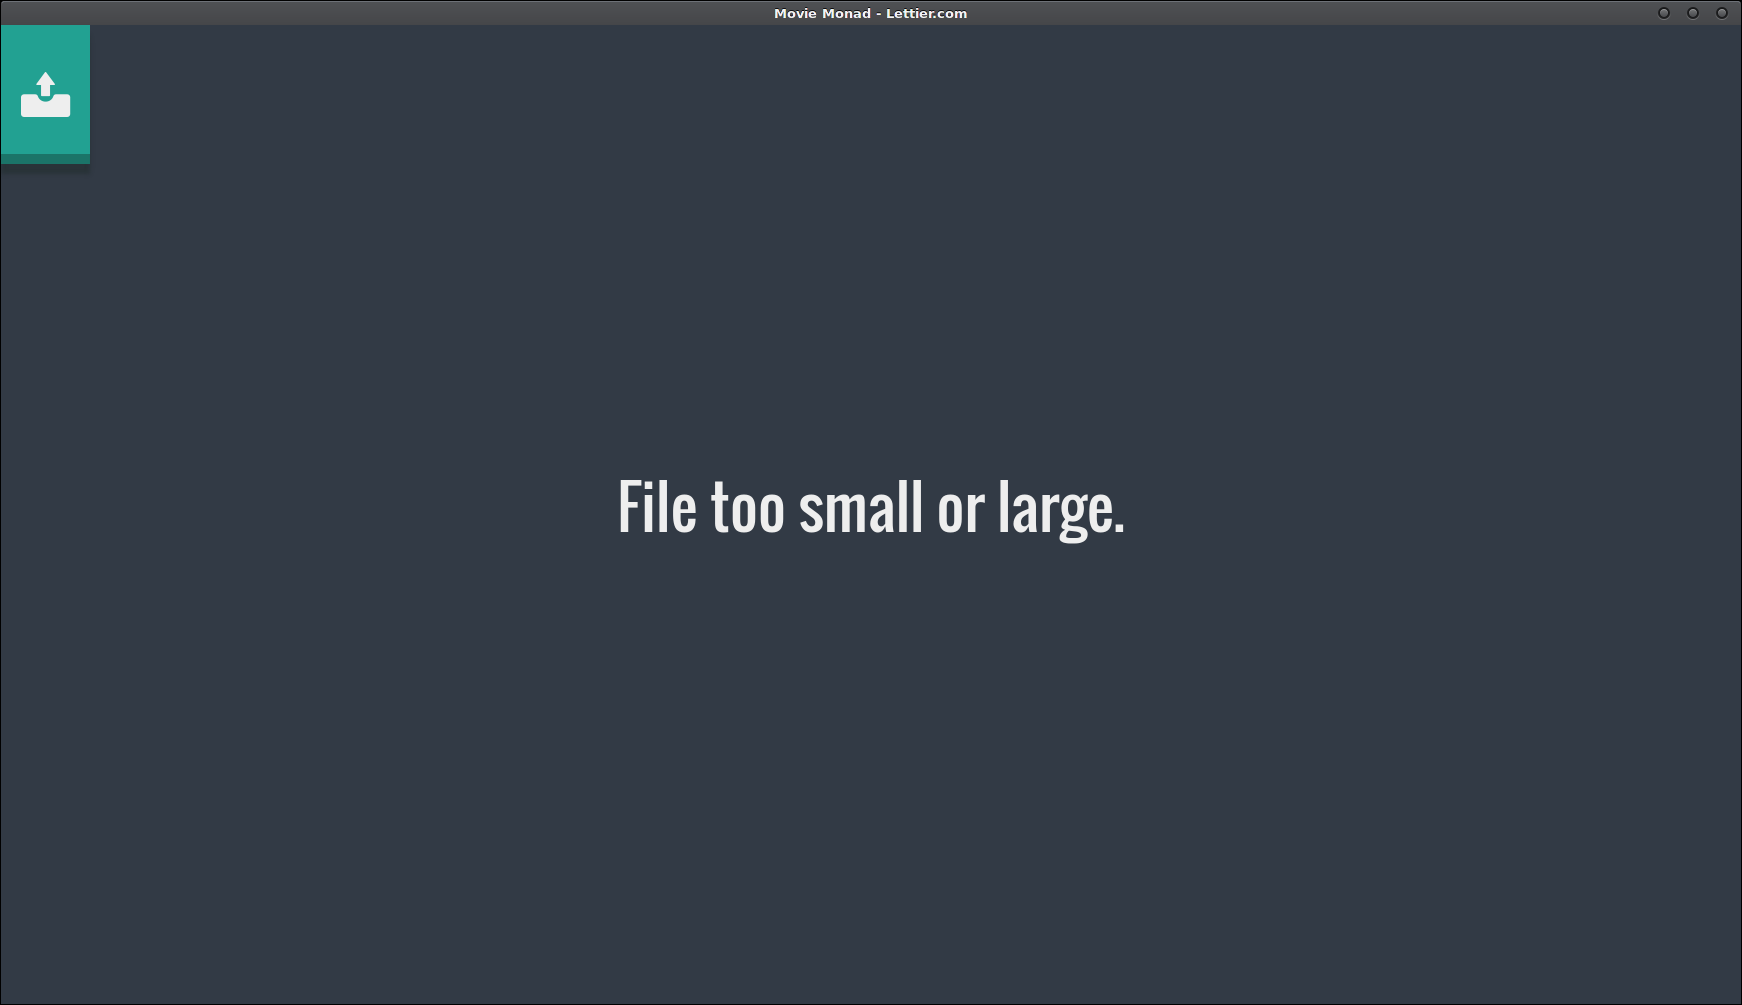 File is too small or large.